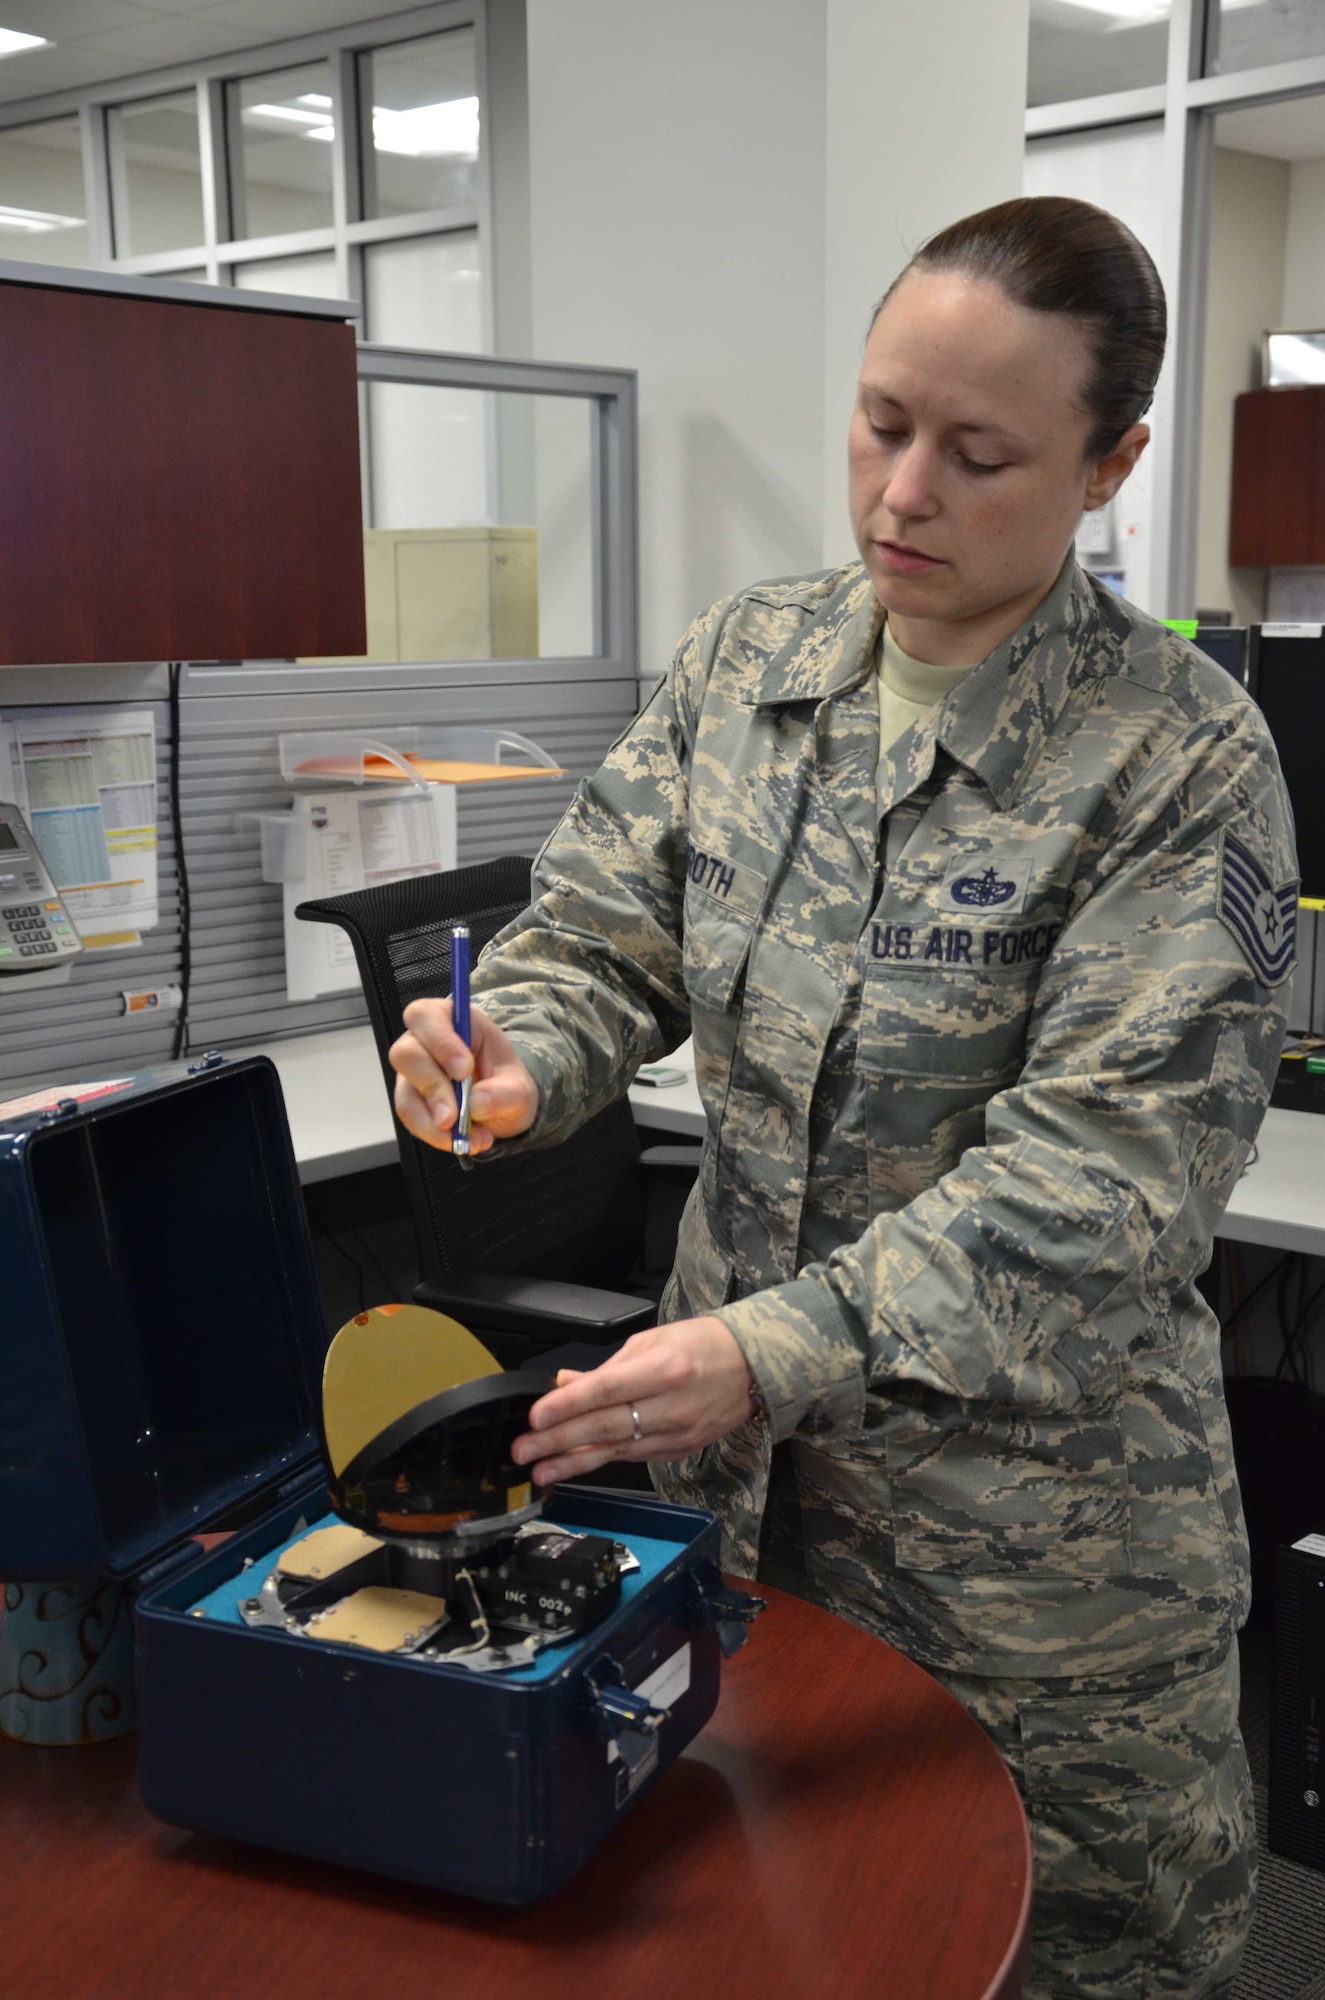 When the Air Force Technical Applications Center celebrated National Pi Day on March 14, Tech. Sgt. BreAnne Groth’s section was amazed when the noncommissioned officer in charge picked up a dry-erase marker and began writing out Pi in decimal form from memory. With ease, she surpassed 100 decimal points and stopped only because she ran out of room on the white board and had to get back to work.